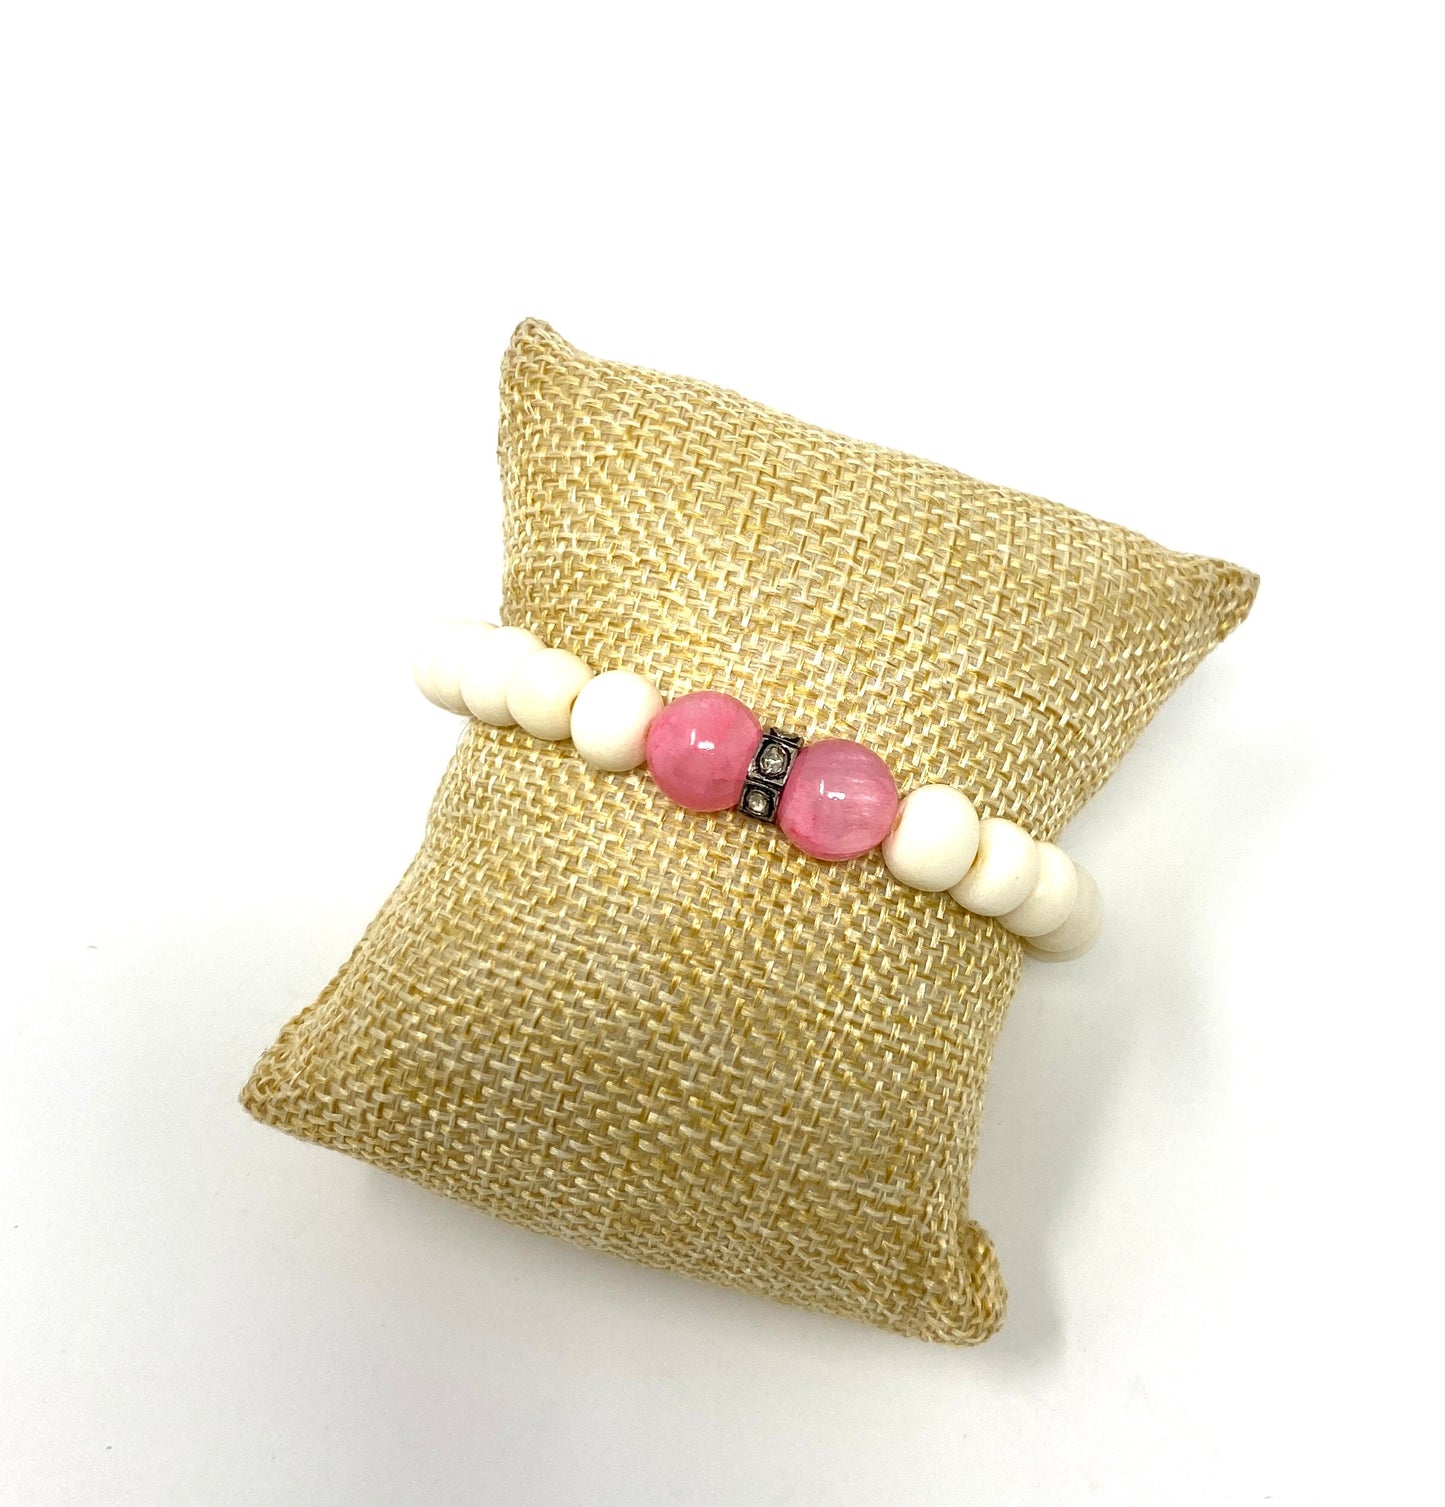 Ivory Elastic Beaded Bracelet With Pink Beads and Diamond Spacer